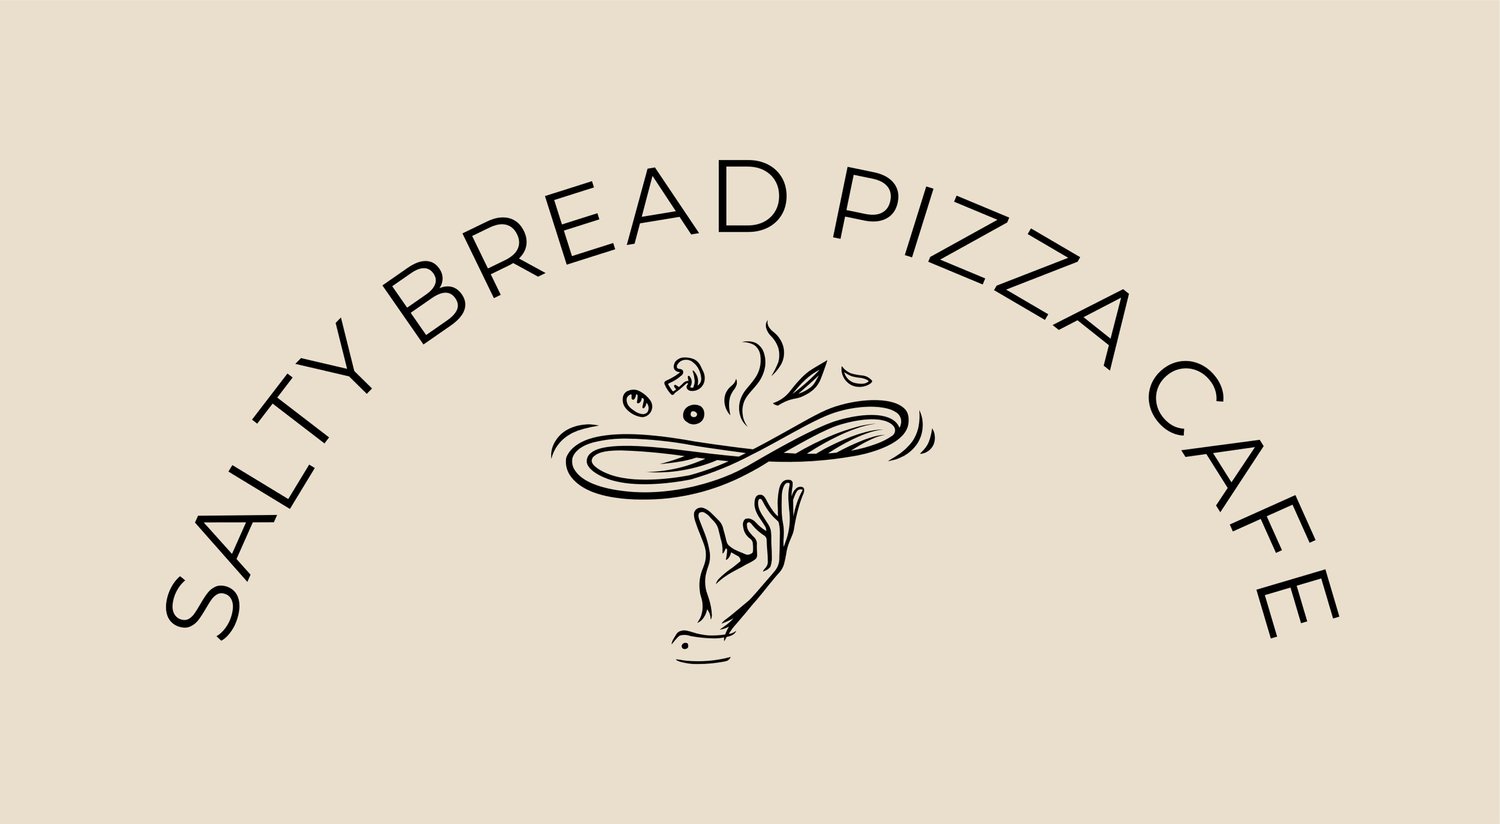 Salty Bread Pizza Cafe